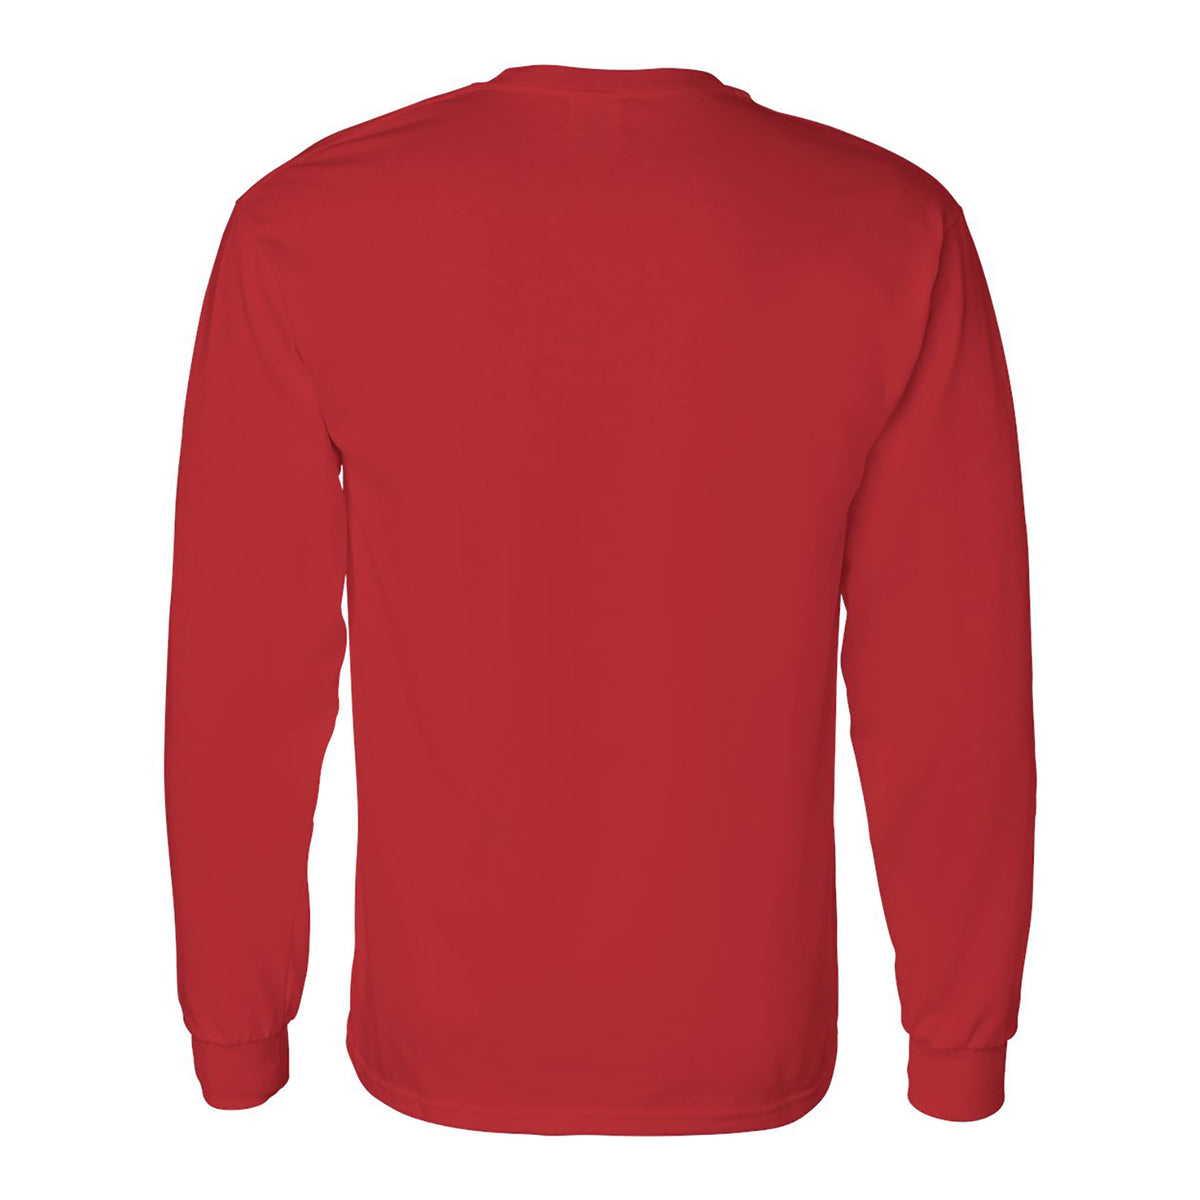 Sconnie Long Sleeve T-shirt - Red – Sconnie Nation